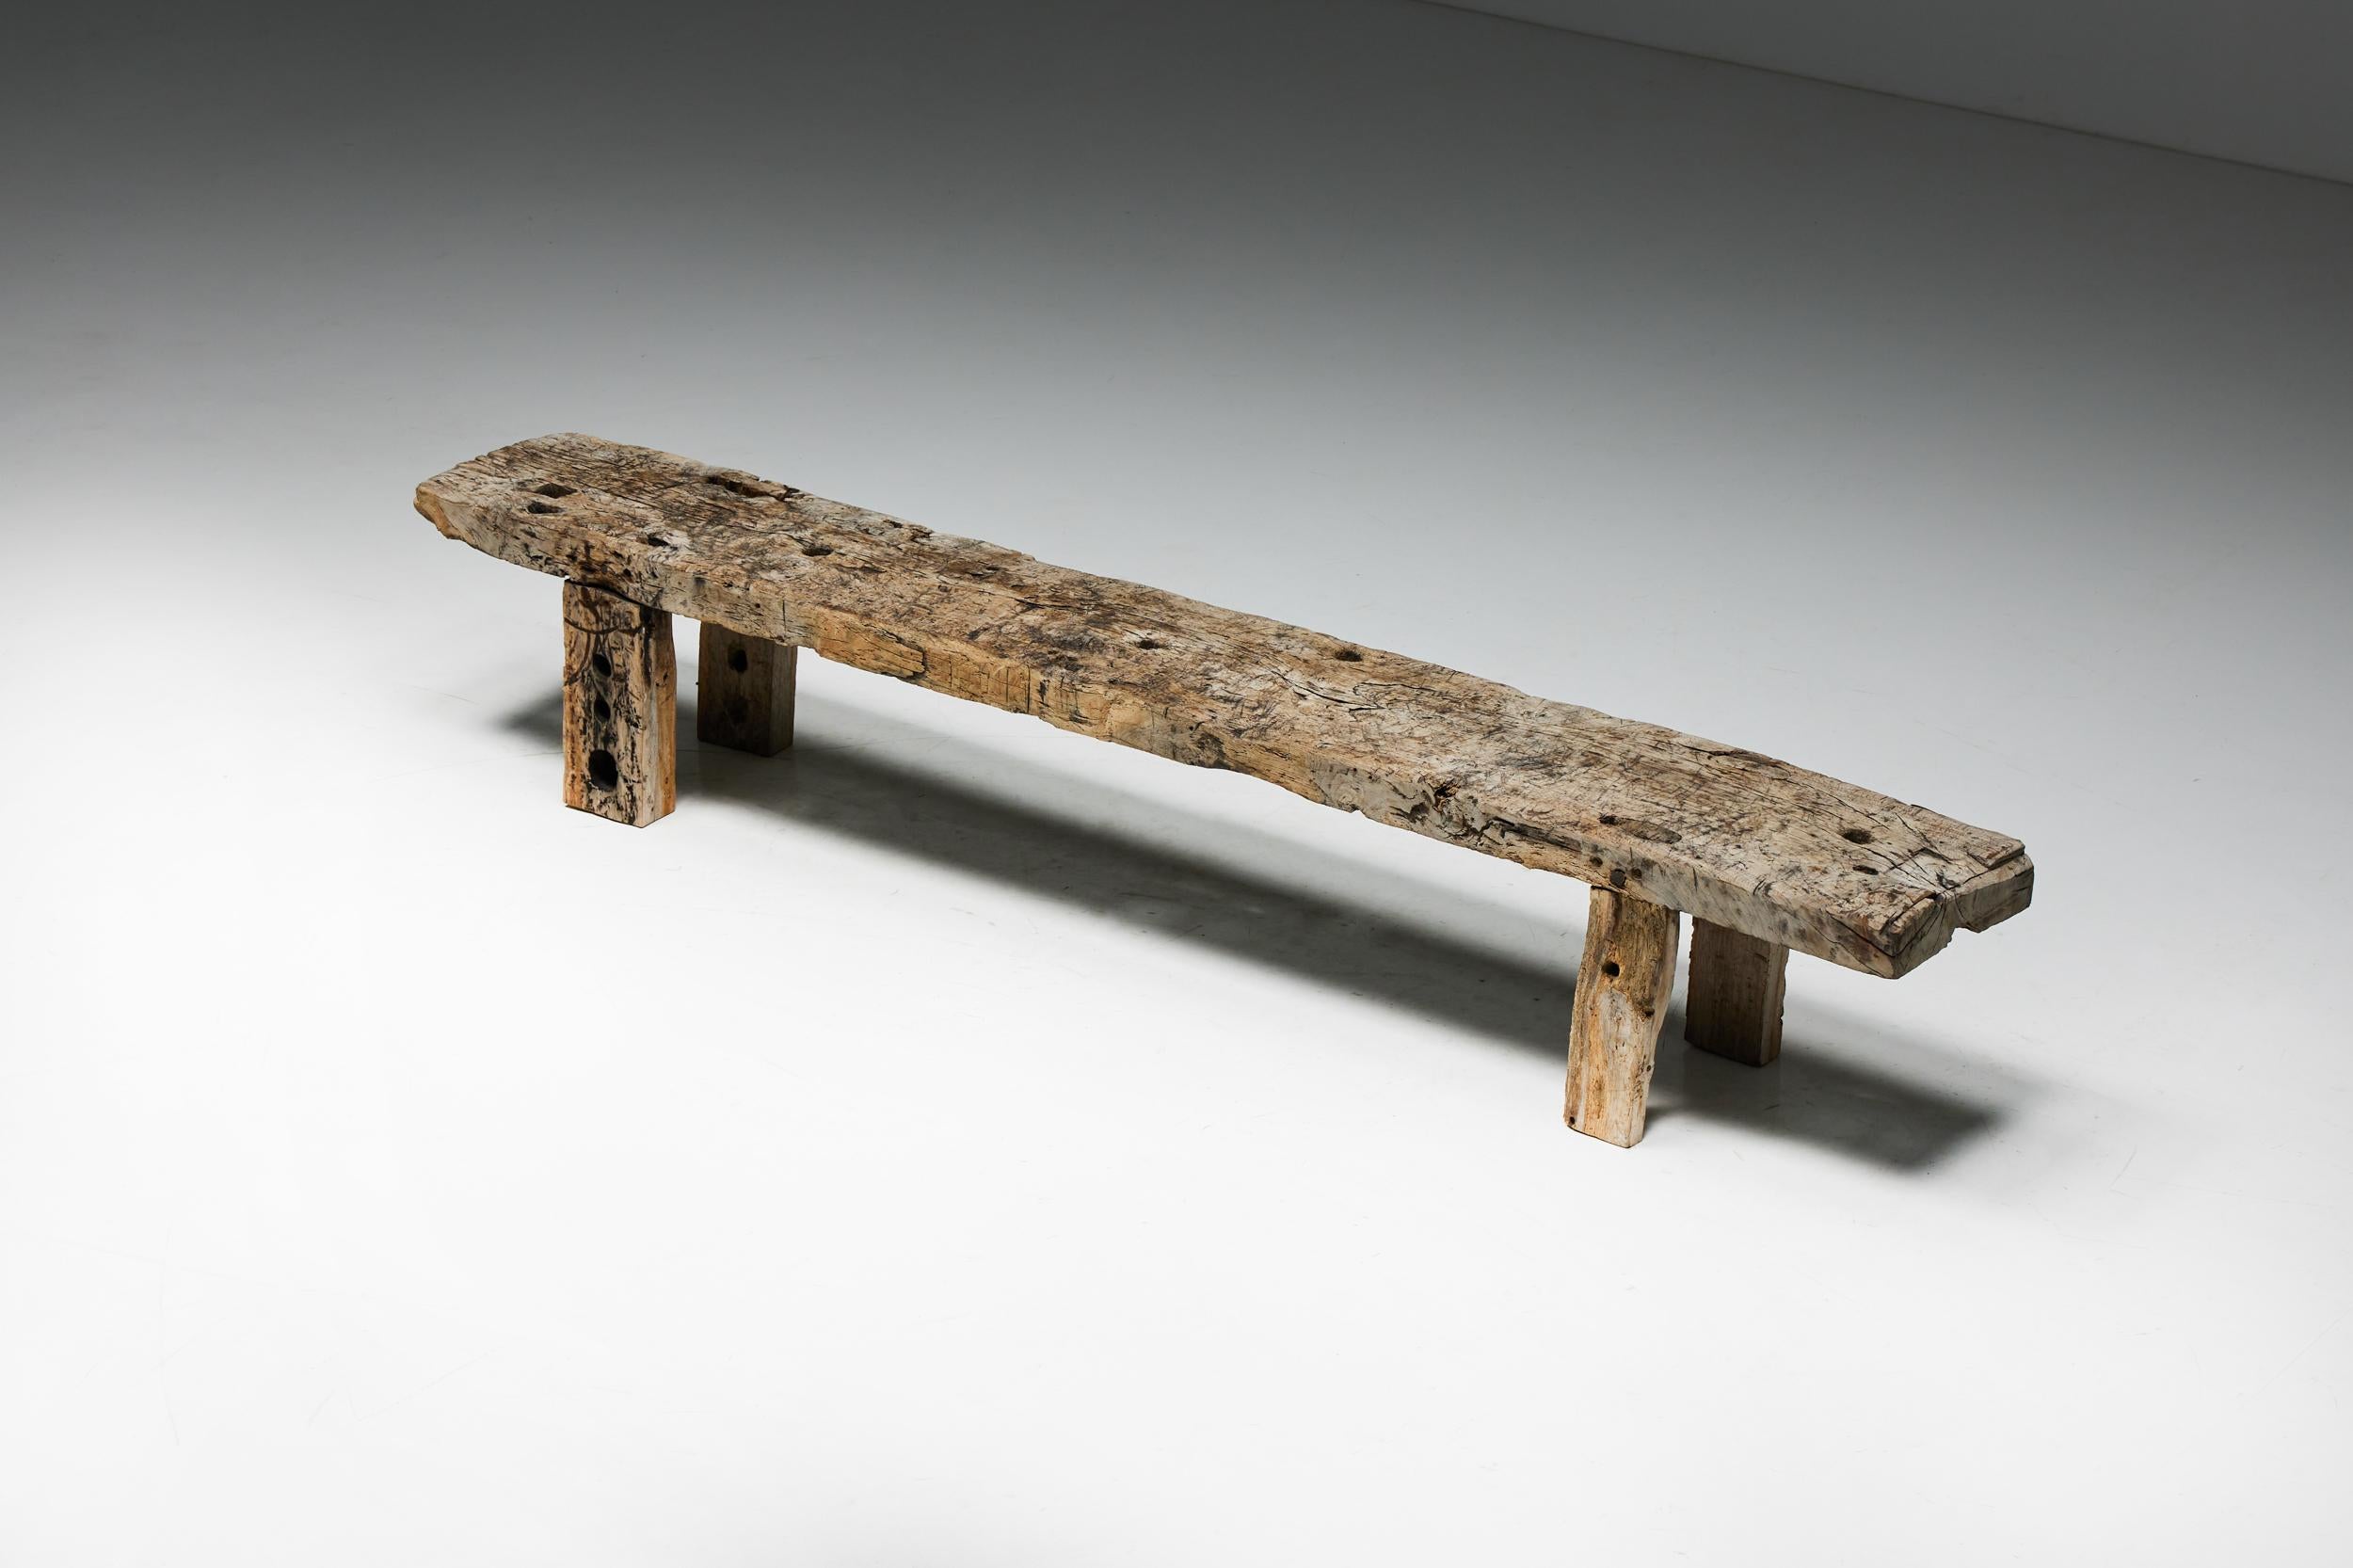 Rustic; Art Populaire; Folk Art; Travail Populaire; Bench; Monoxylite; Wabi Sabi; 20th Century; Antique;

Early 20th century bench, seamlessly integrating wabi-sabi design elements. Crafted with care, this bench shows its charm in the hand-carved